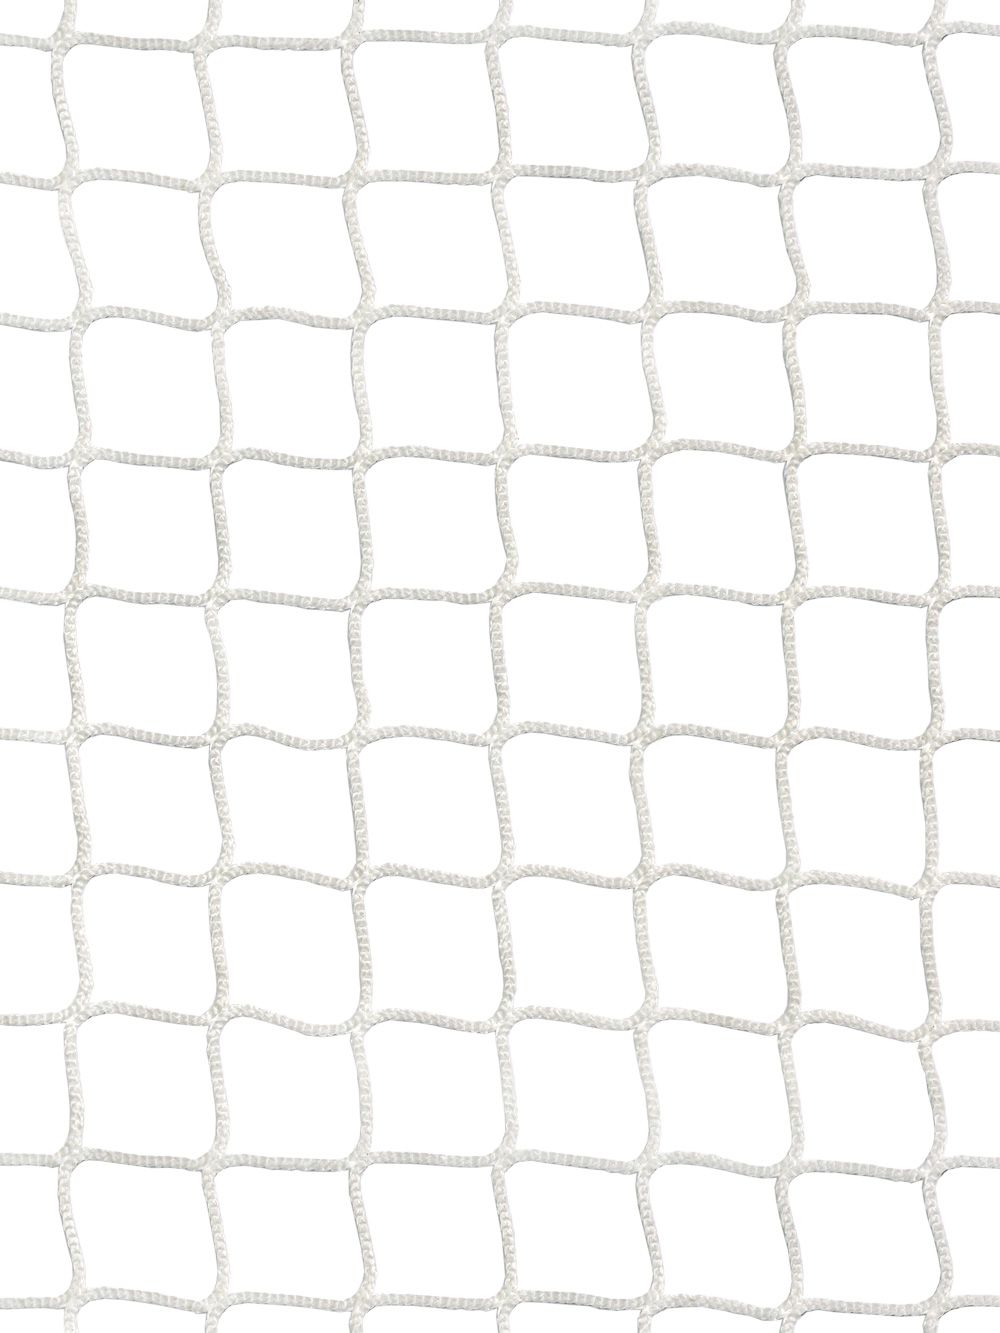 N4203WH FR  InCord Knotless 1-1/2 inch White Custom Safety Netting